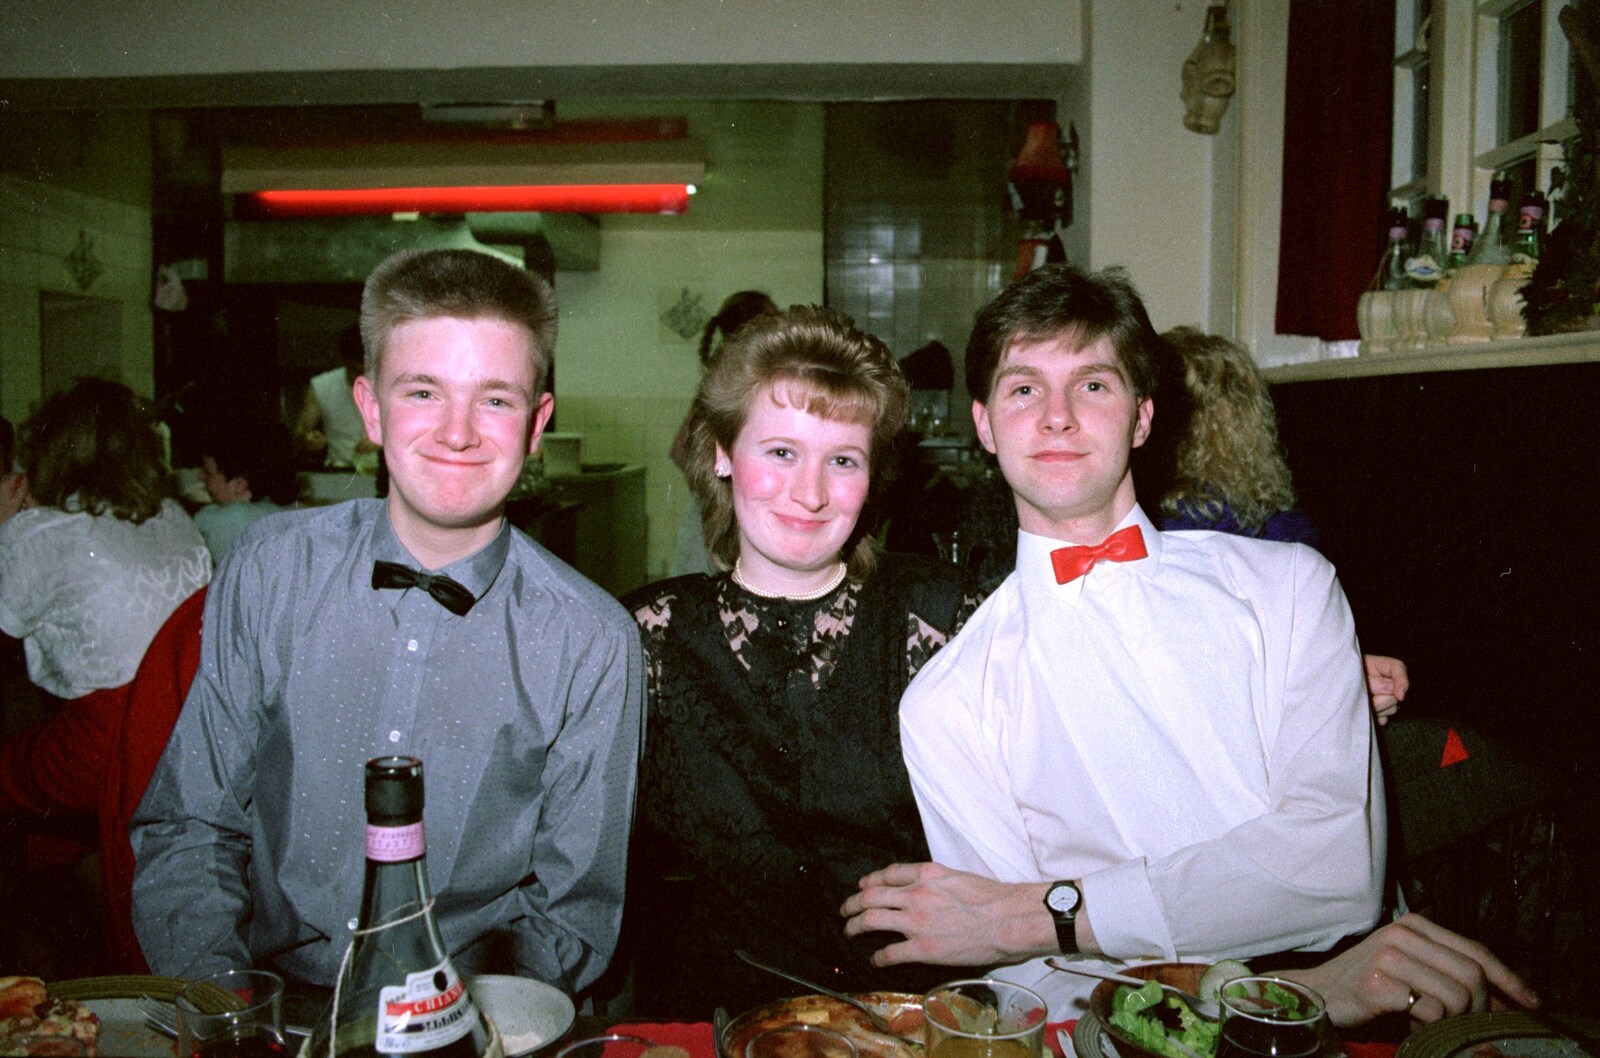 Nosher, Maria and Sean from Bransgore Barbeque and Soman-Wherry Drinks, Dorset and Norwich - 2nd April 1988